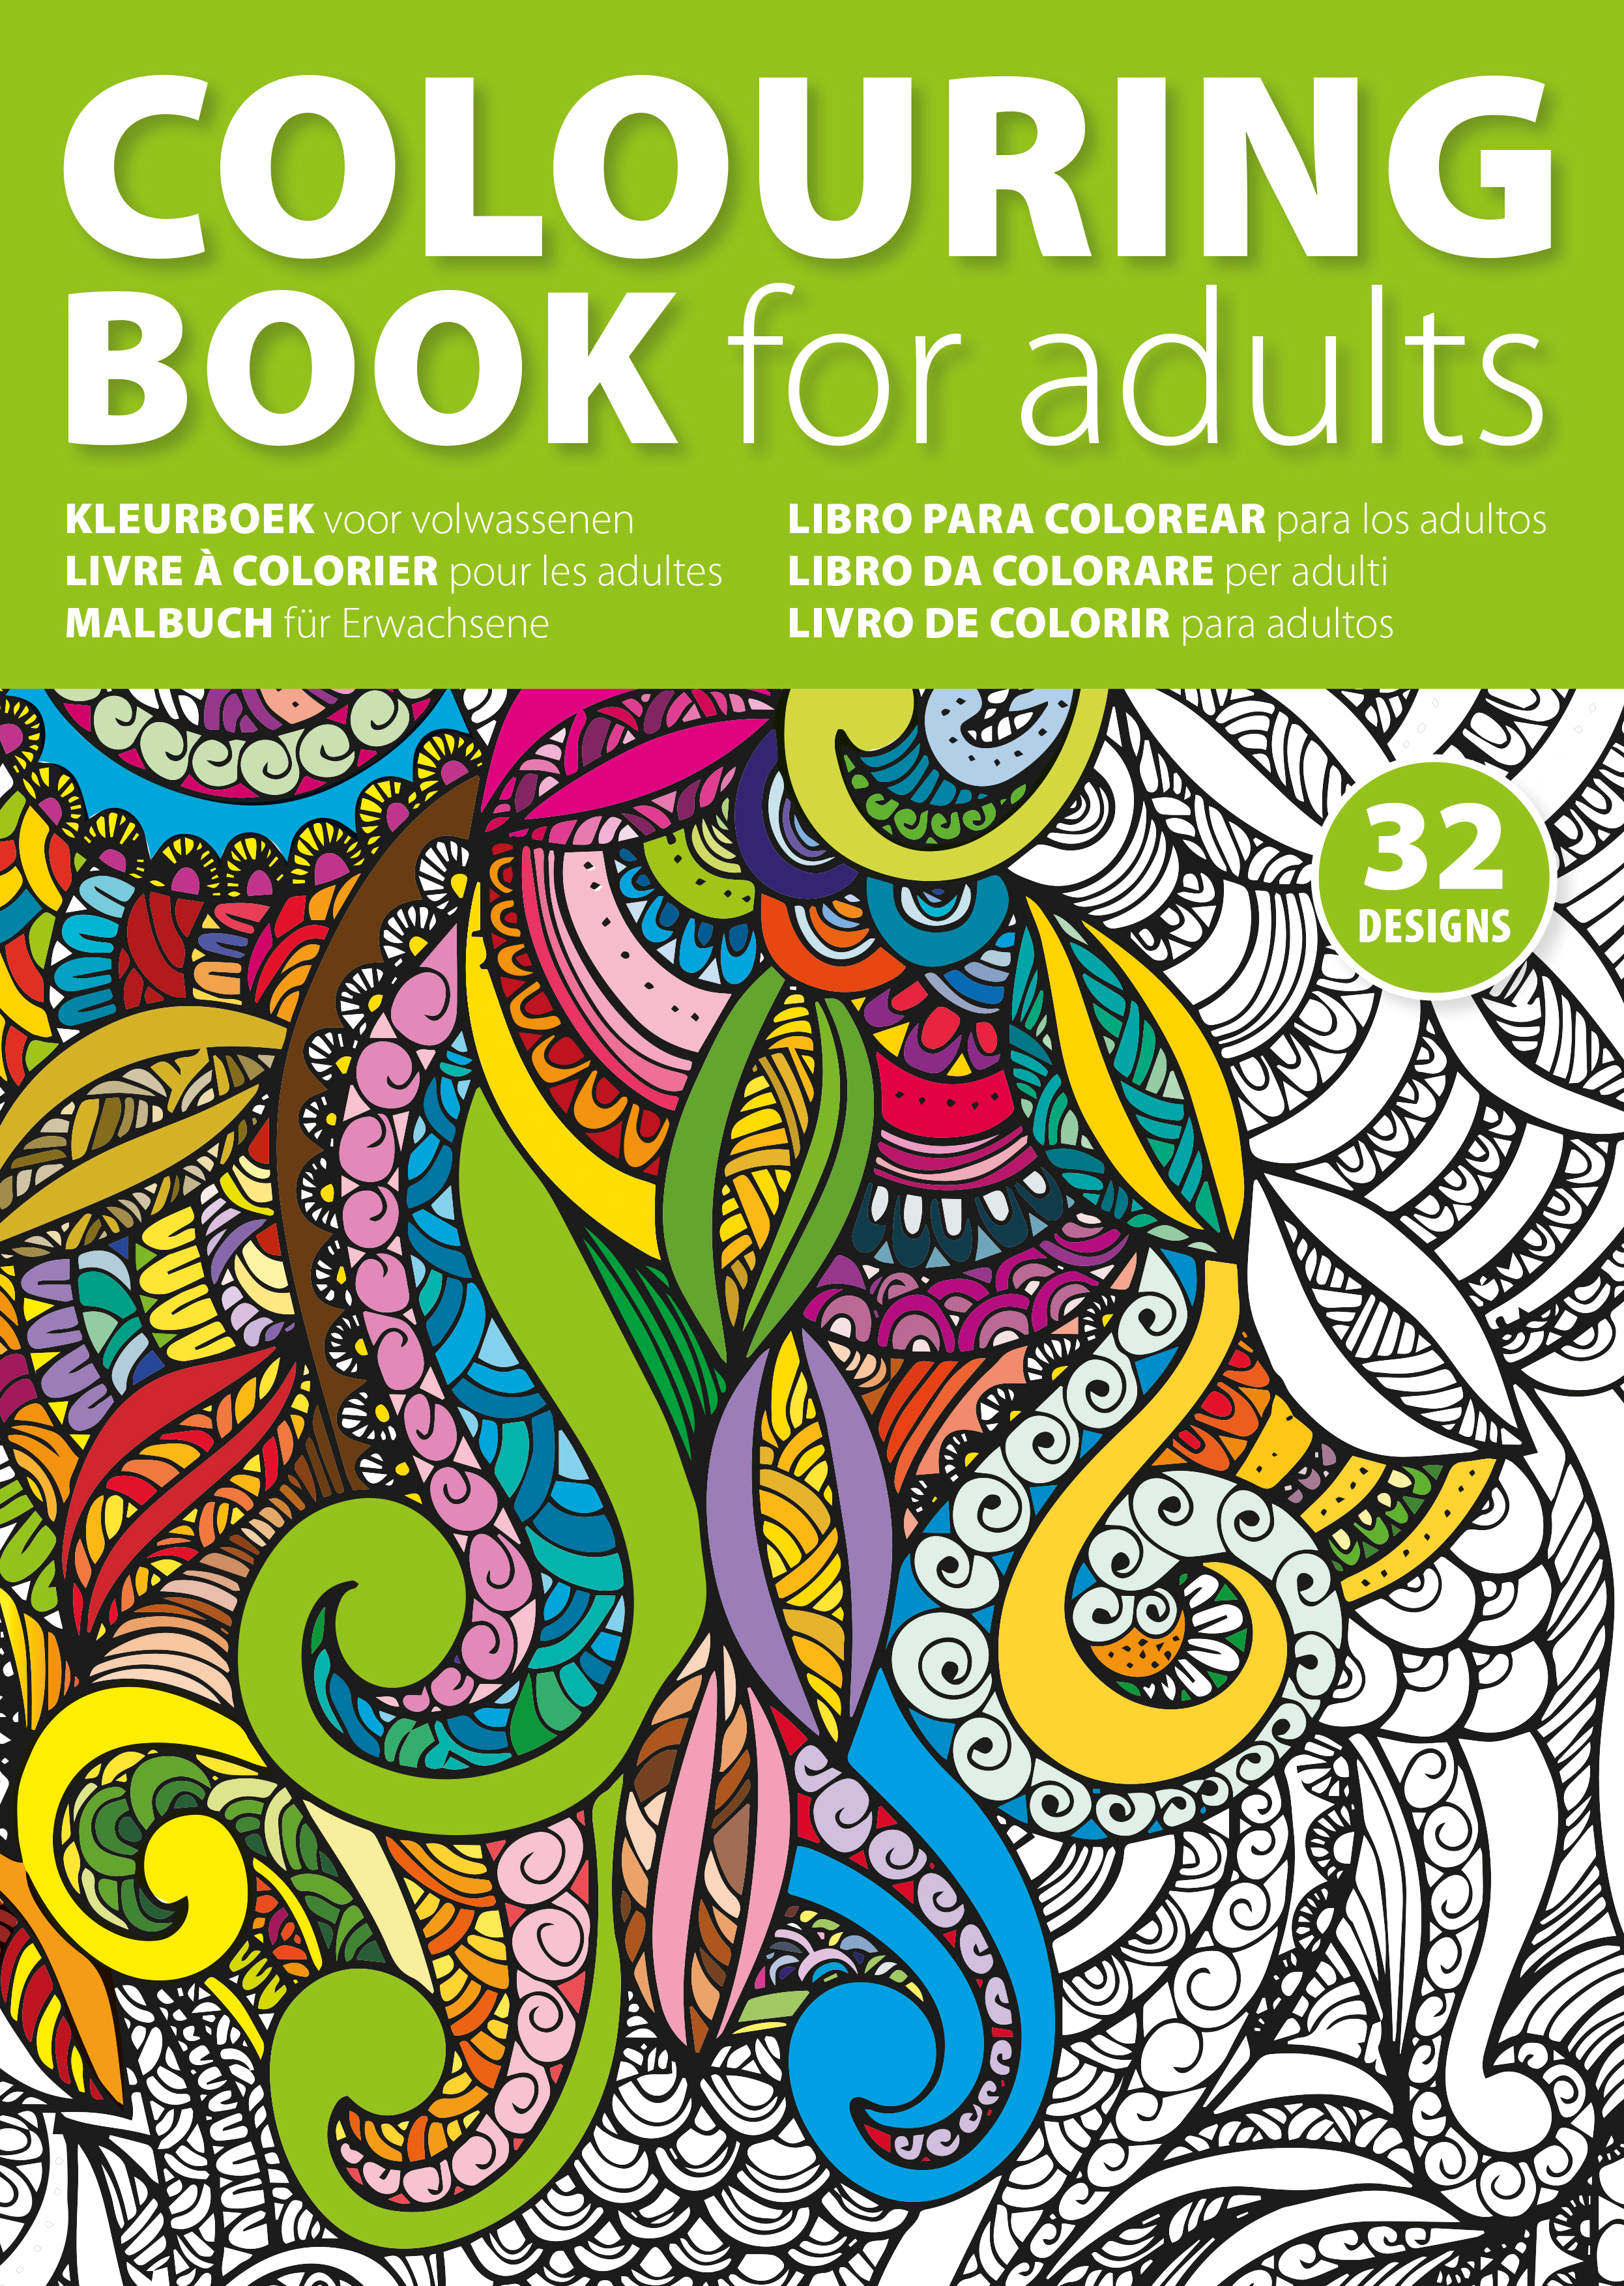 4908 - Adult's colouring book